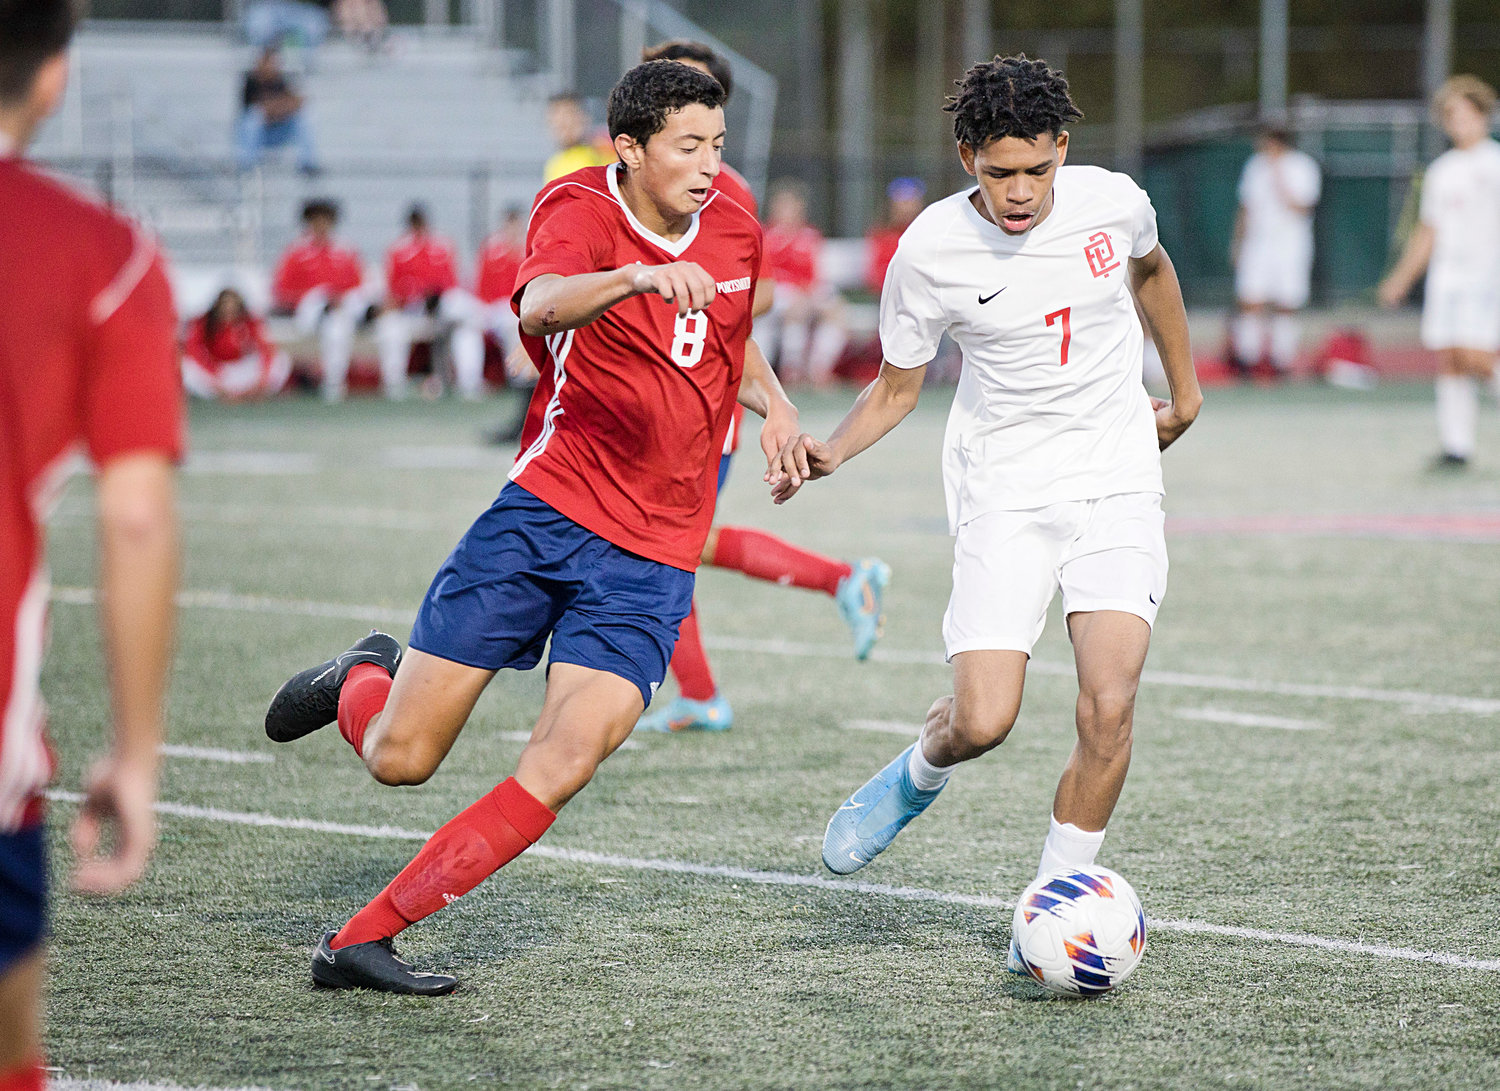 Alexis Silva controls the ball for East Providence as a Portsmouth opponent pressures him from behind.